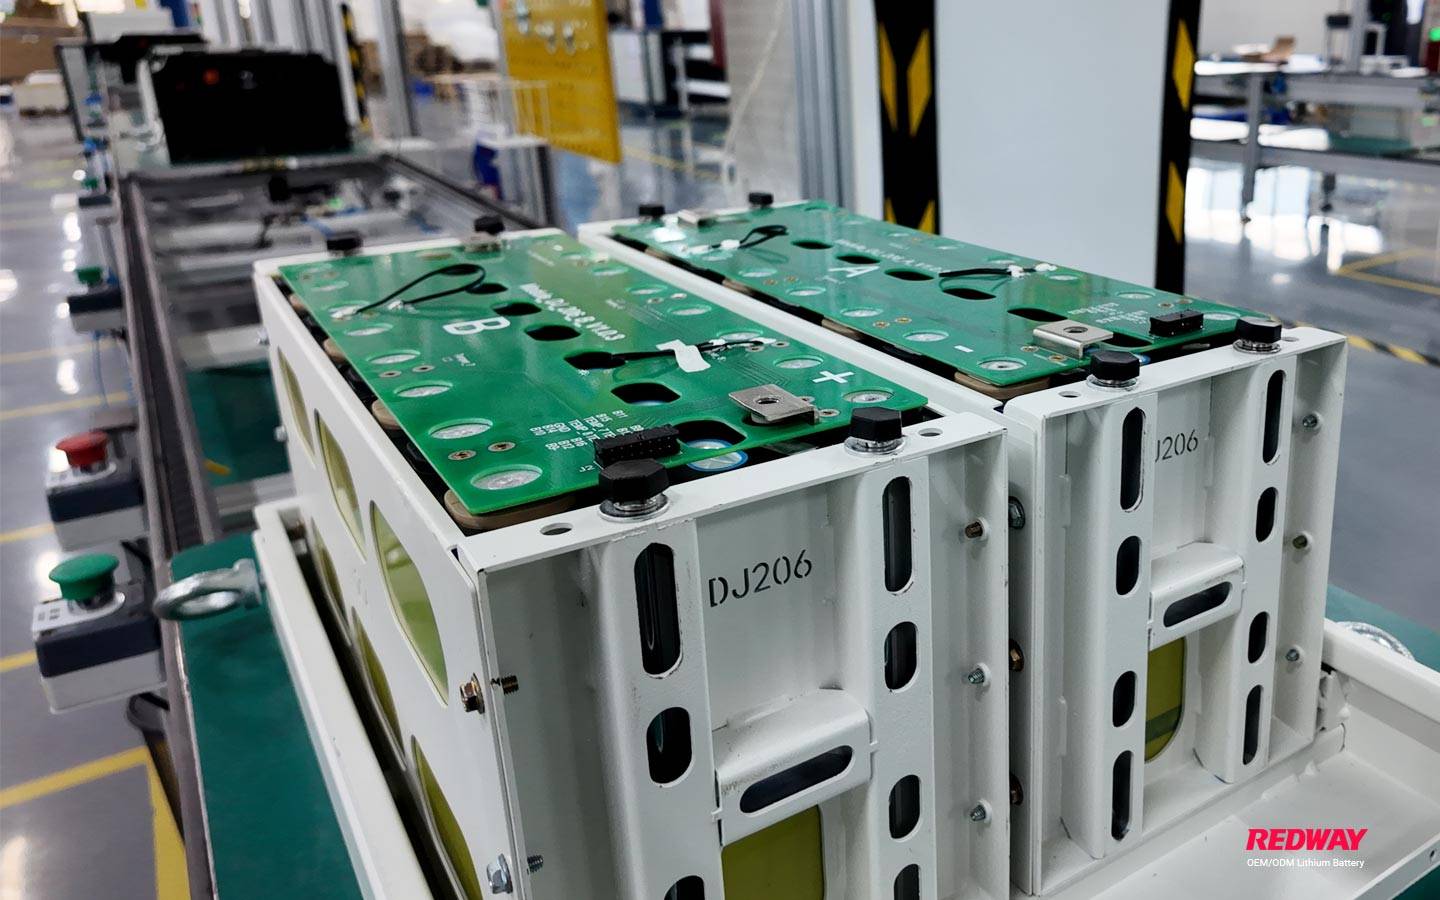 Power Lithium Battery Pack Product at Redway Power lithium battery factory.